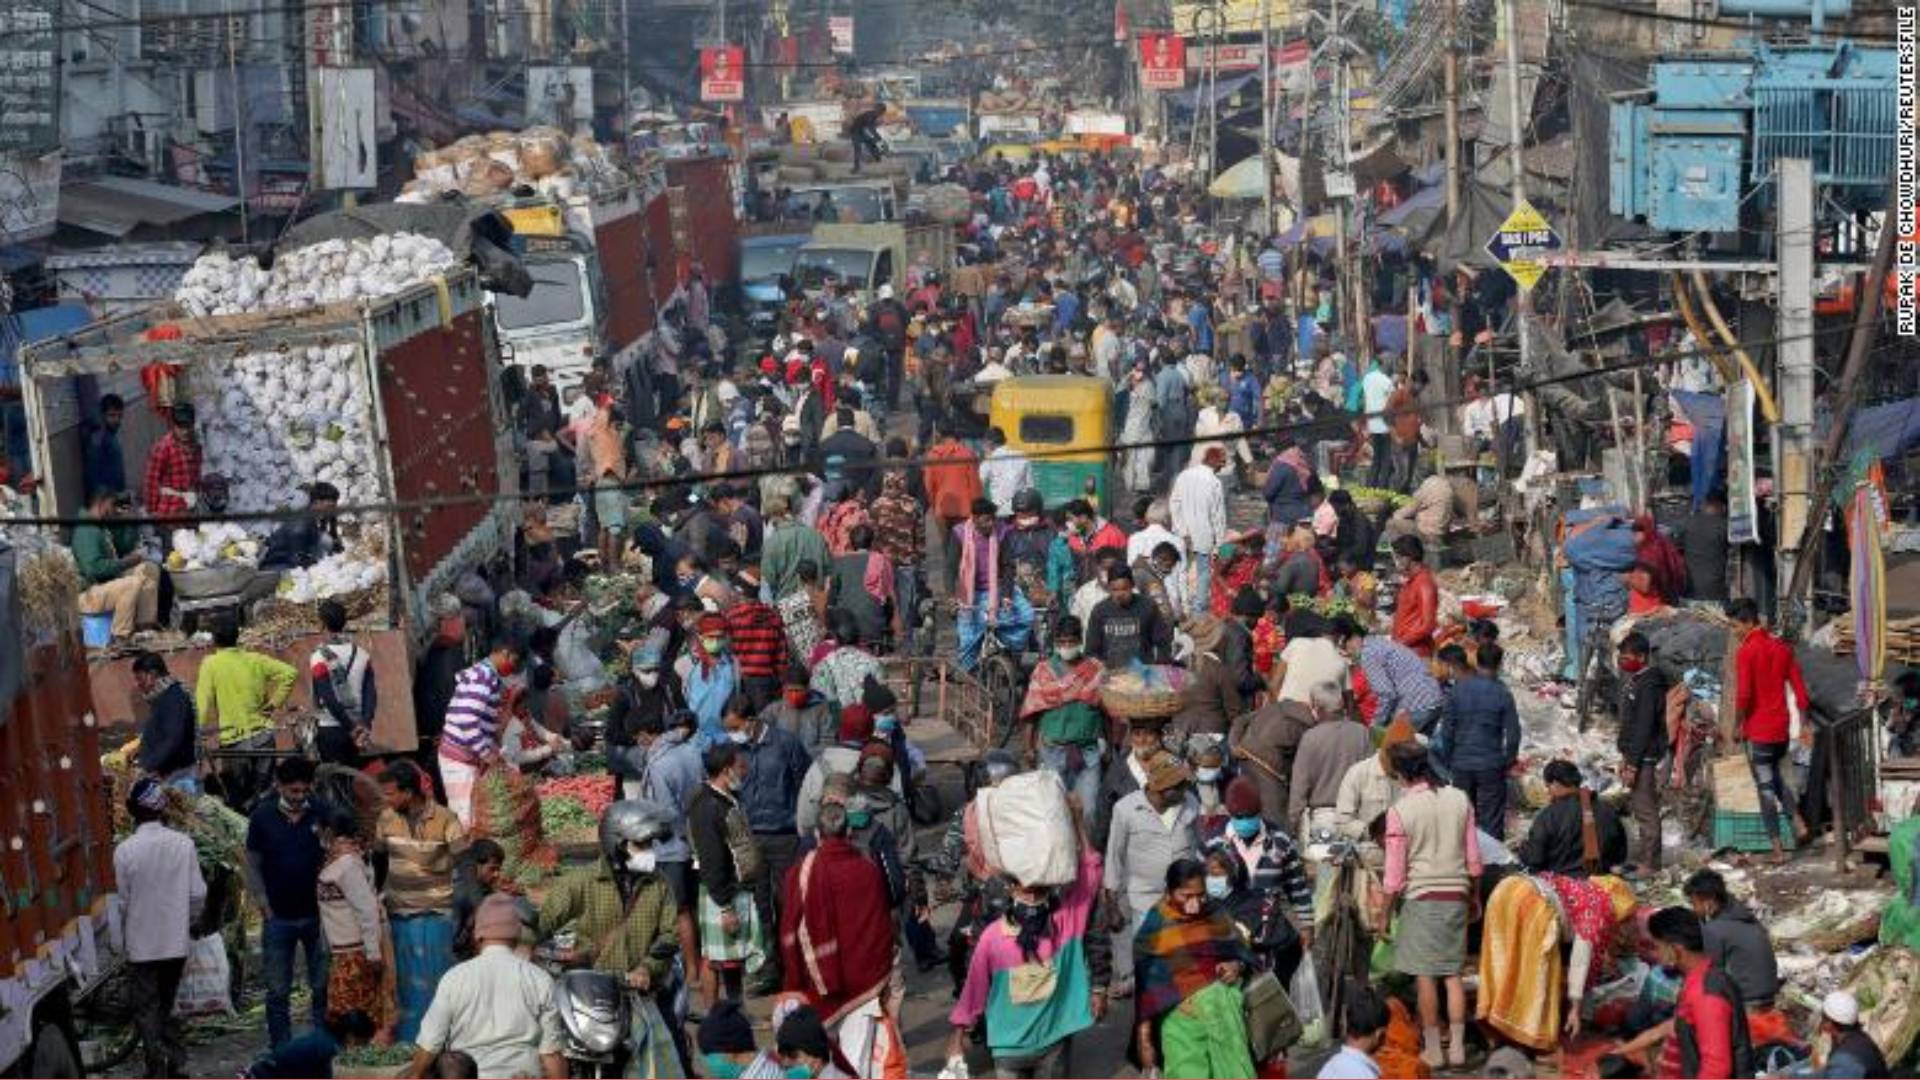  India is set to surpass China as the world's most populous country in 2023, according to the United Nations - Photo Credit: CNN